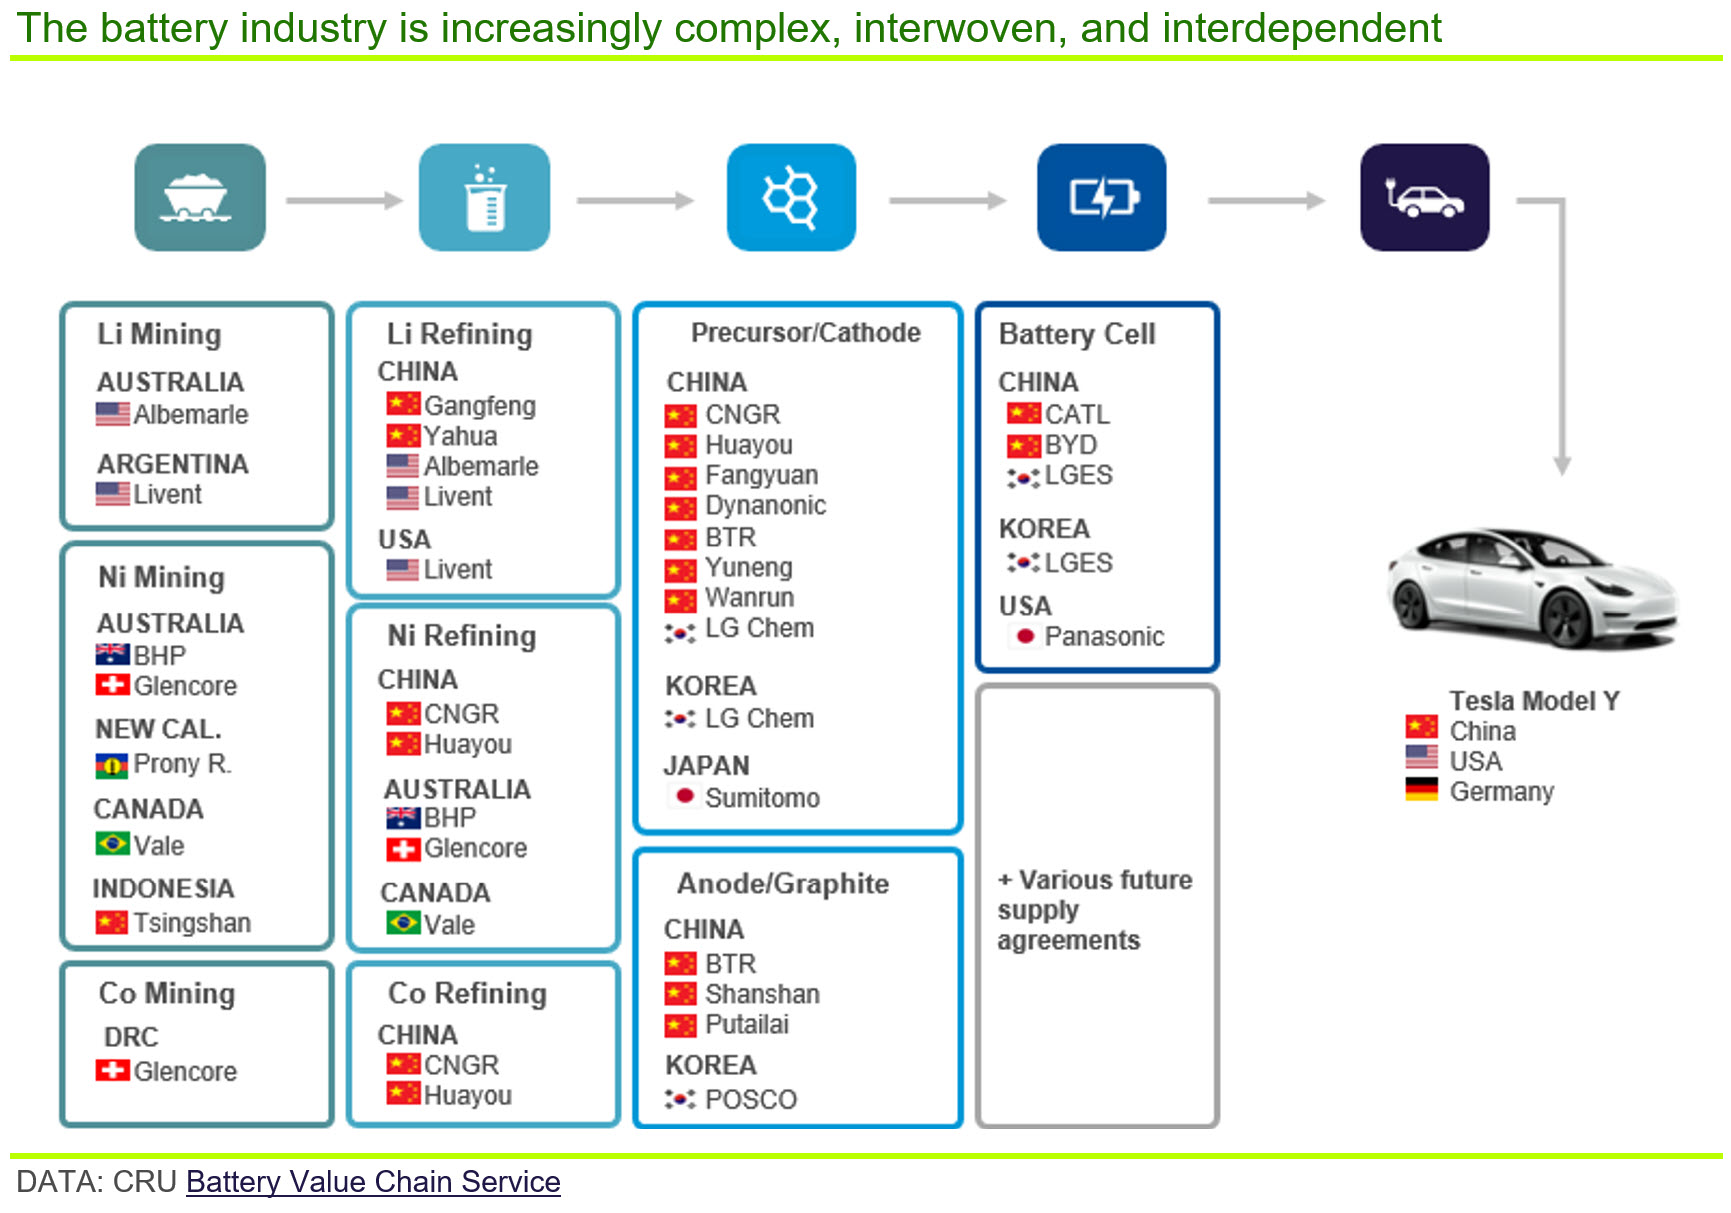 Graph showing that the battery industry is increasingly complex, interwoven, and interdependent